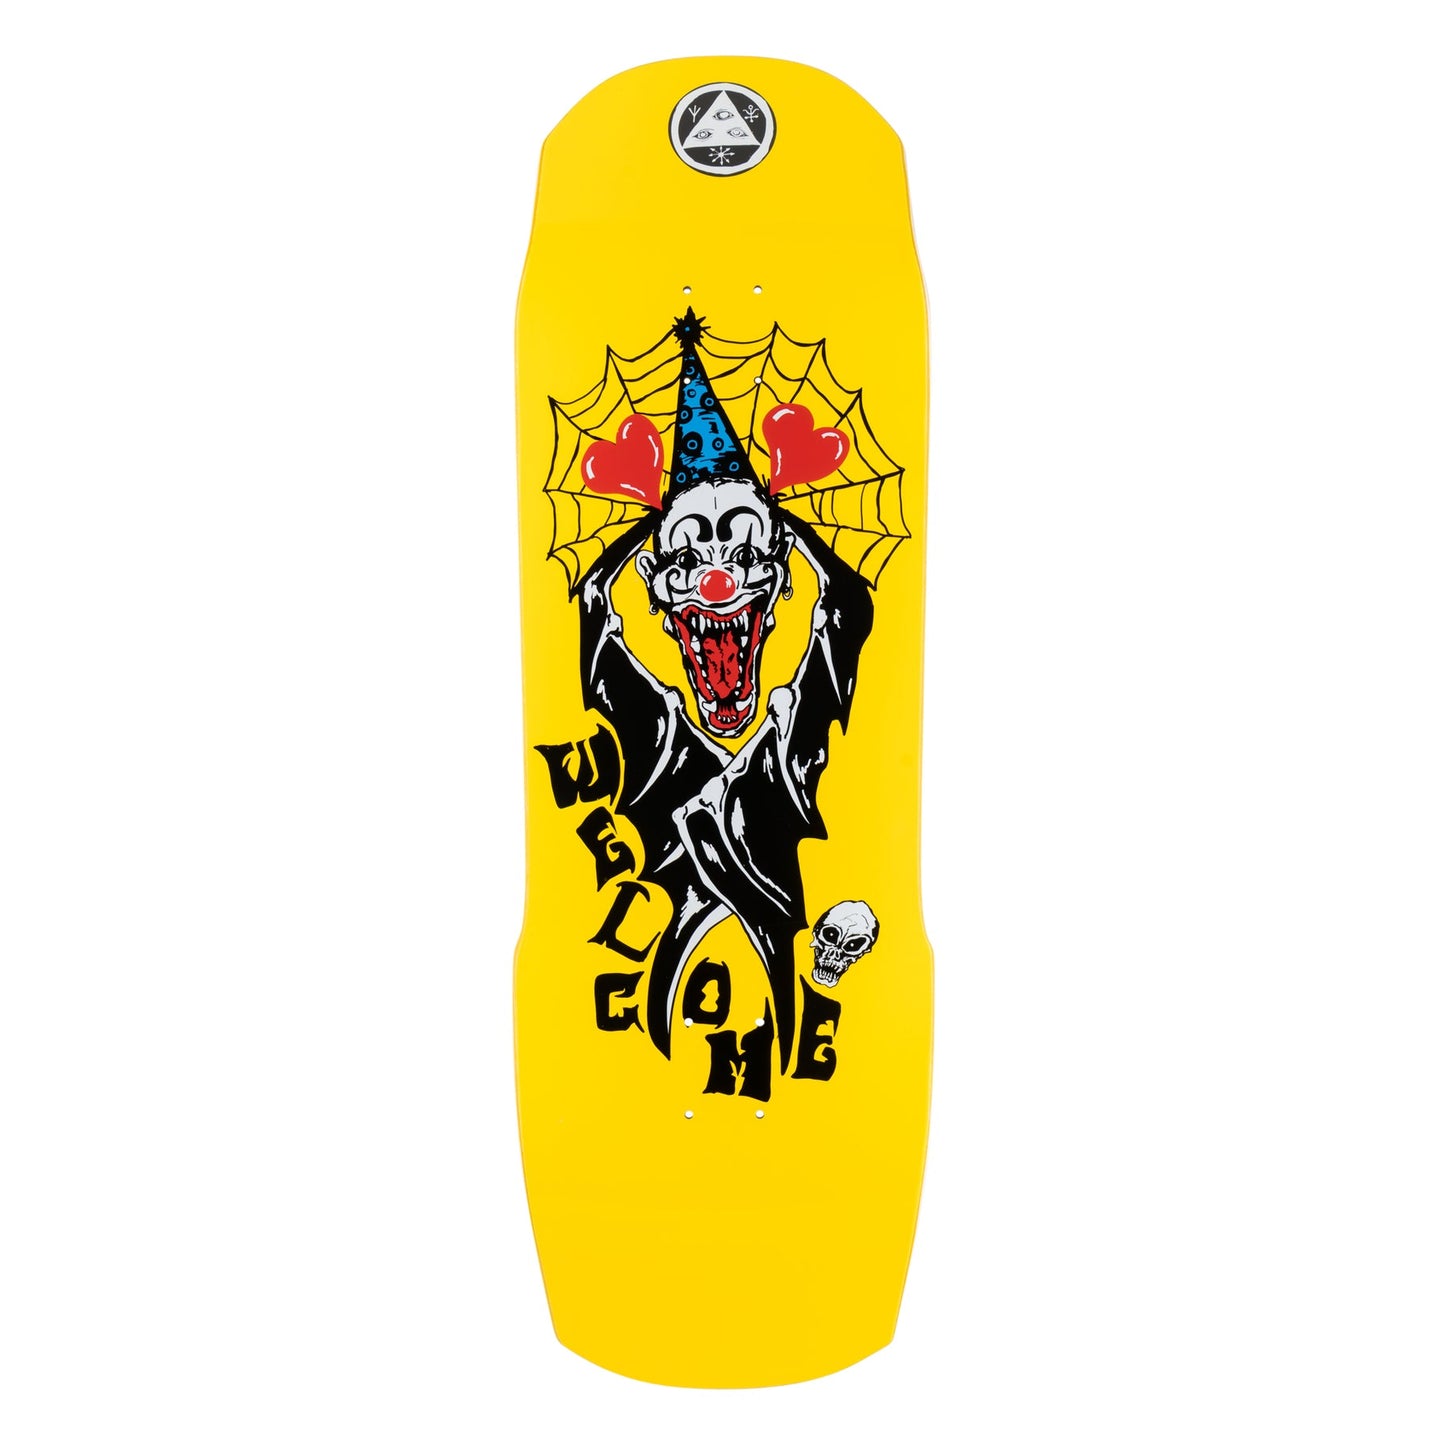 Welcome Skateboards 10.0" Crazy Tony On Totem 2.0 Deck - Neon Yellow